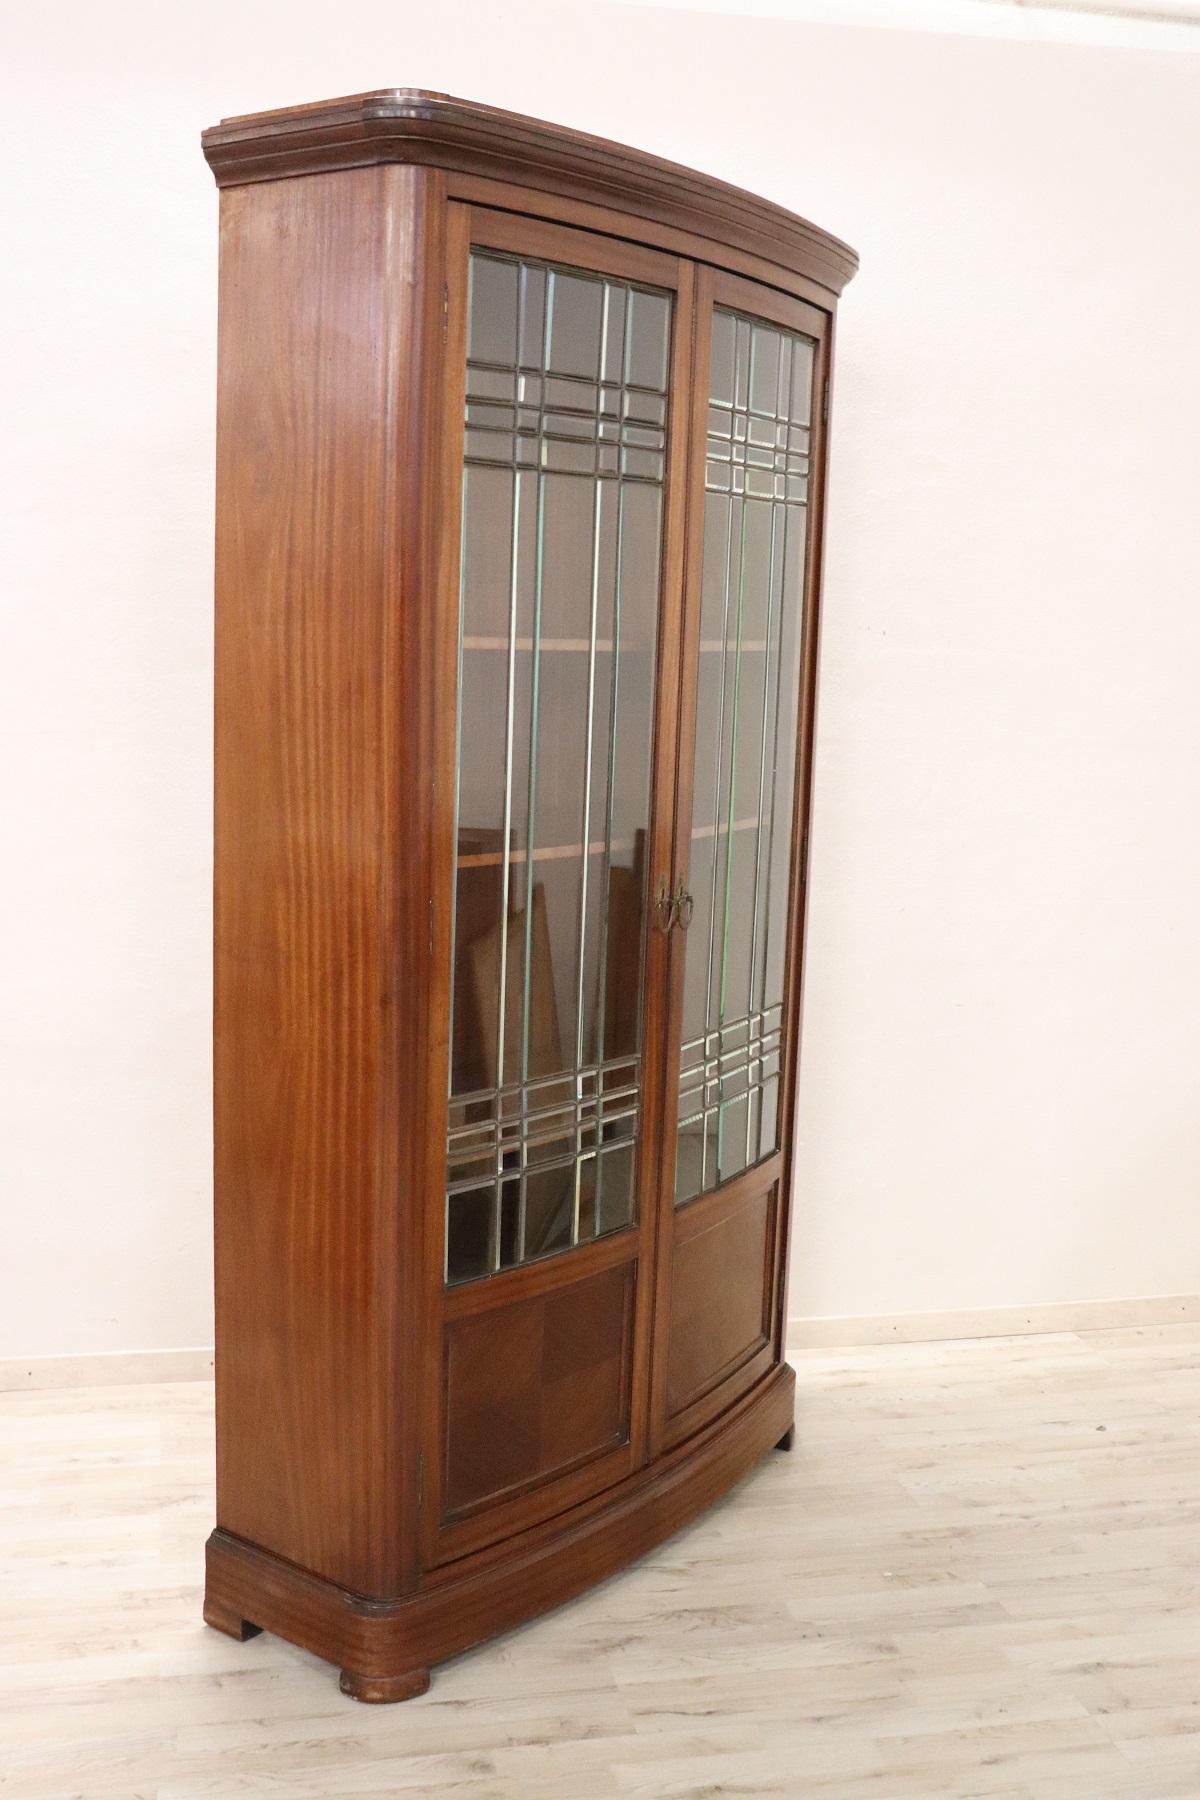 Refined bookcase or showcase early 20th century in mahogany wood. Precious original glass. Very linear and essential perfect to be combined even in a modern home. The upper part with glass doors is perfect for displaying your collection of precious